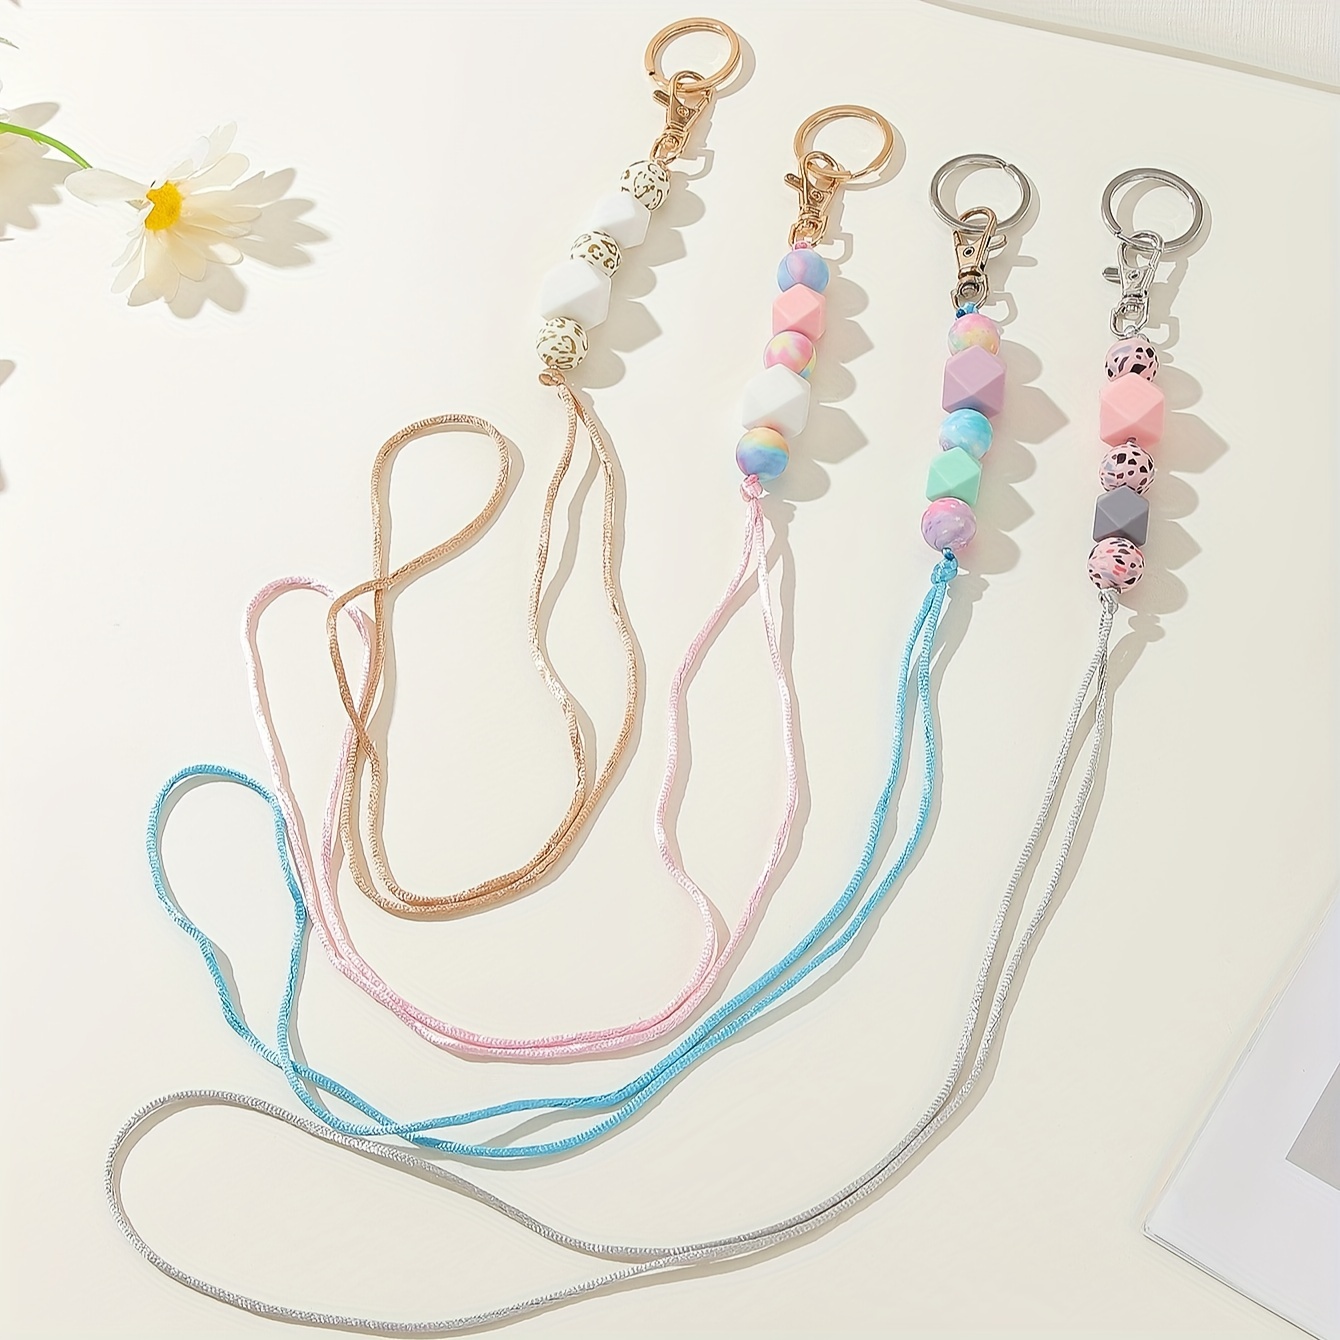 Cute Floral Lanyards for Id Holder,id Card Holder with Beaded